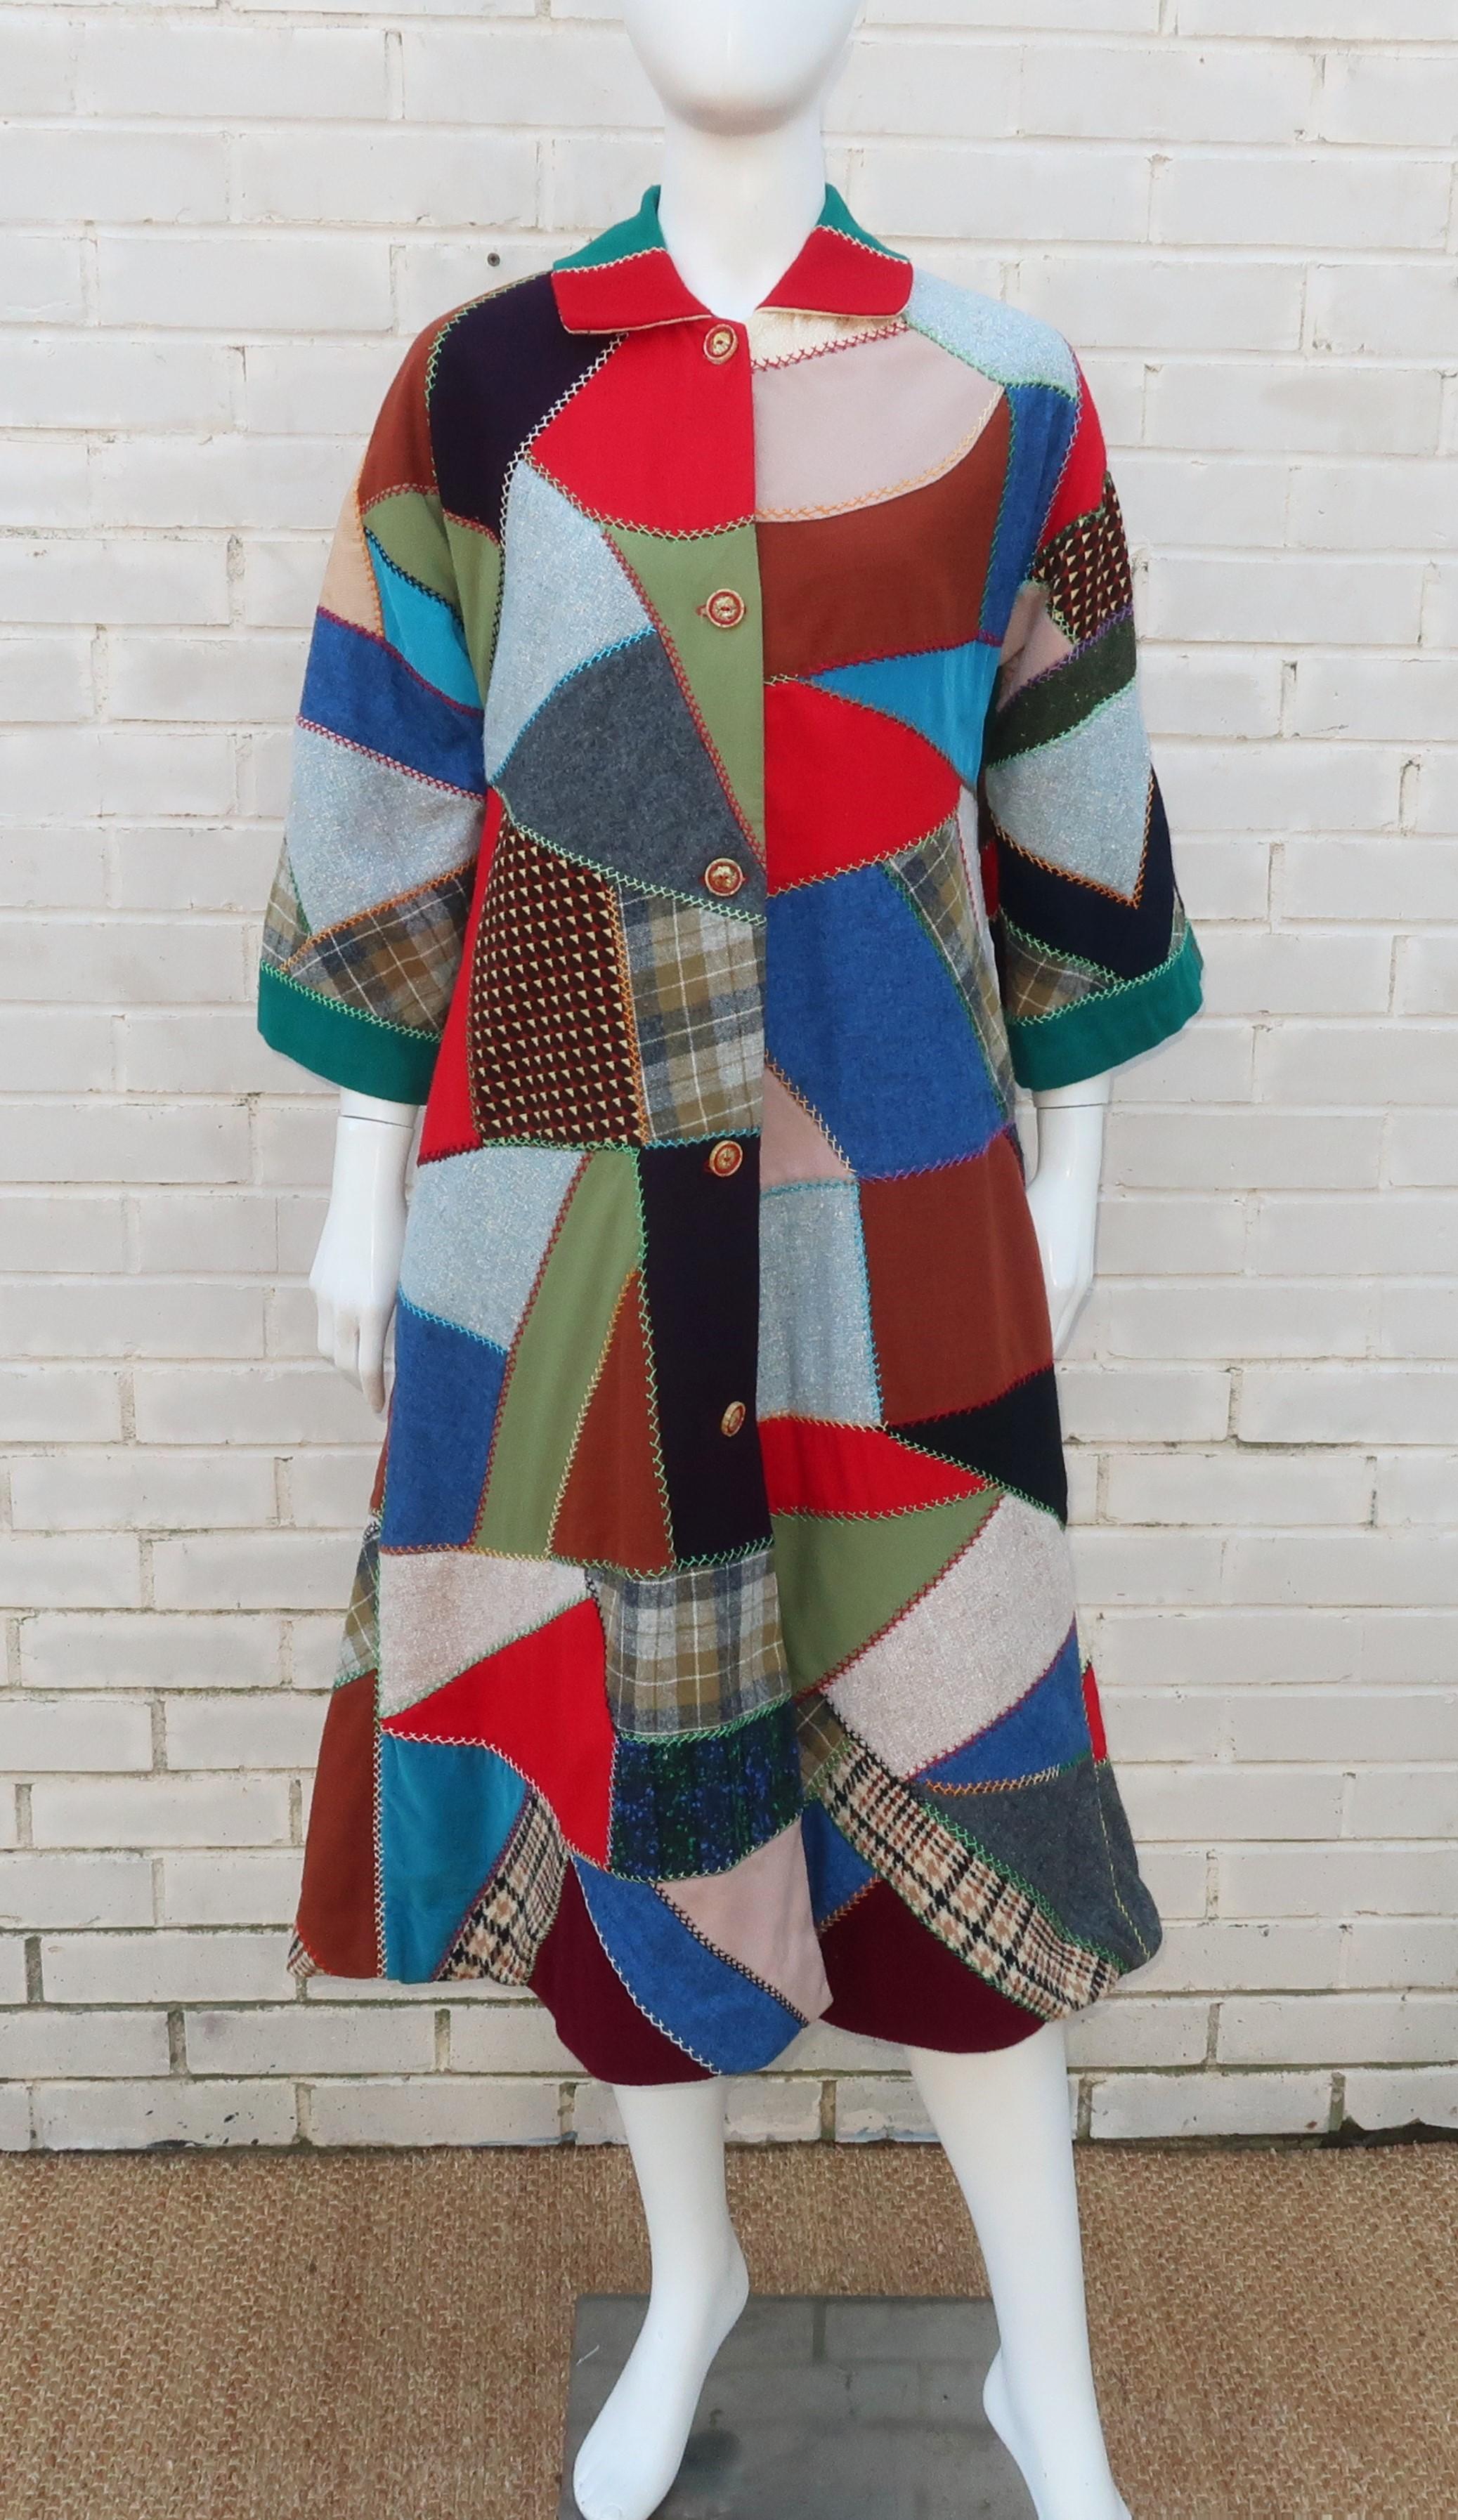 This 1950's crazy quilt coat creation is a wonderful combination of homespun talent and folk art style.  The patchwork design includes wool, corduroy and boucle in shades of red, blue, lavender, gray, aubergine, olive green, teal green, baby blue,